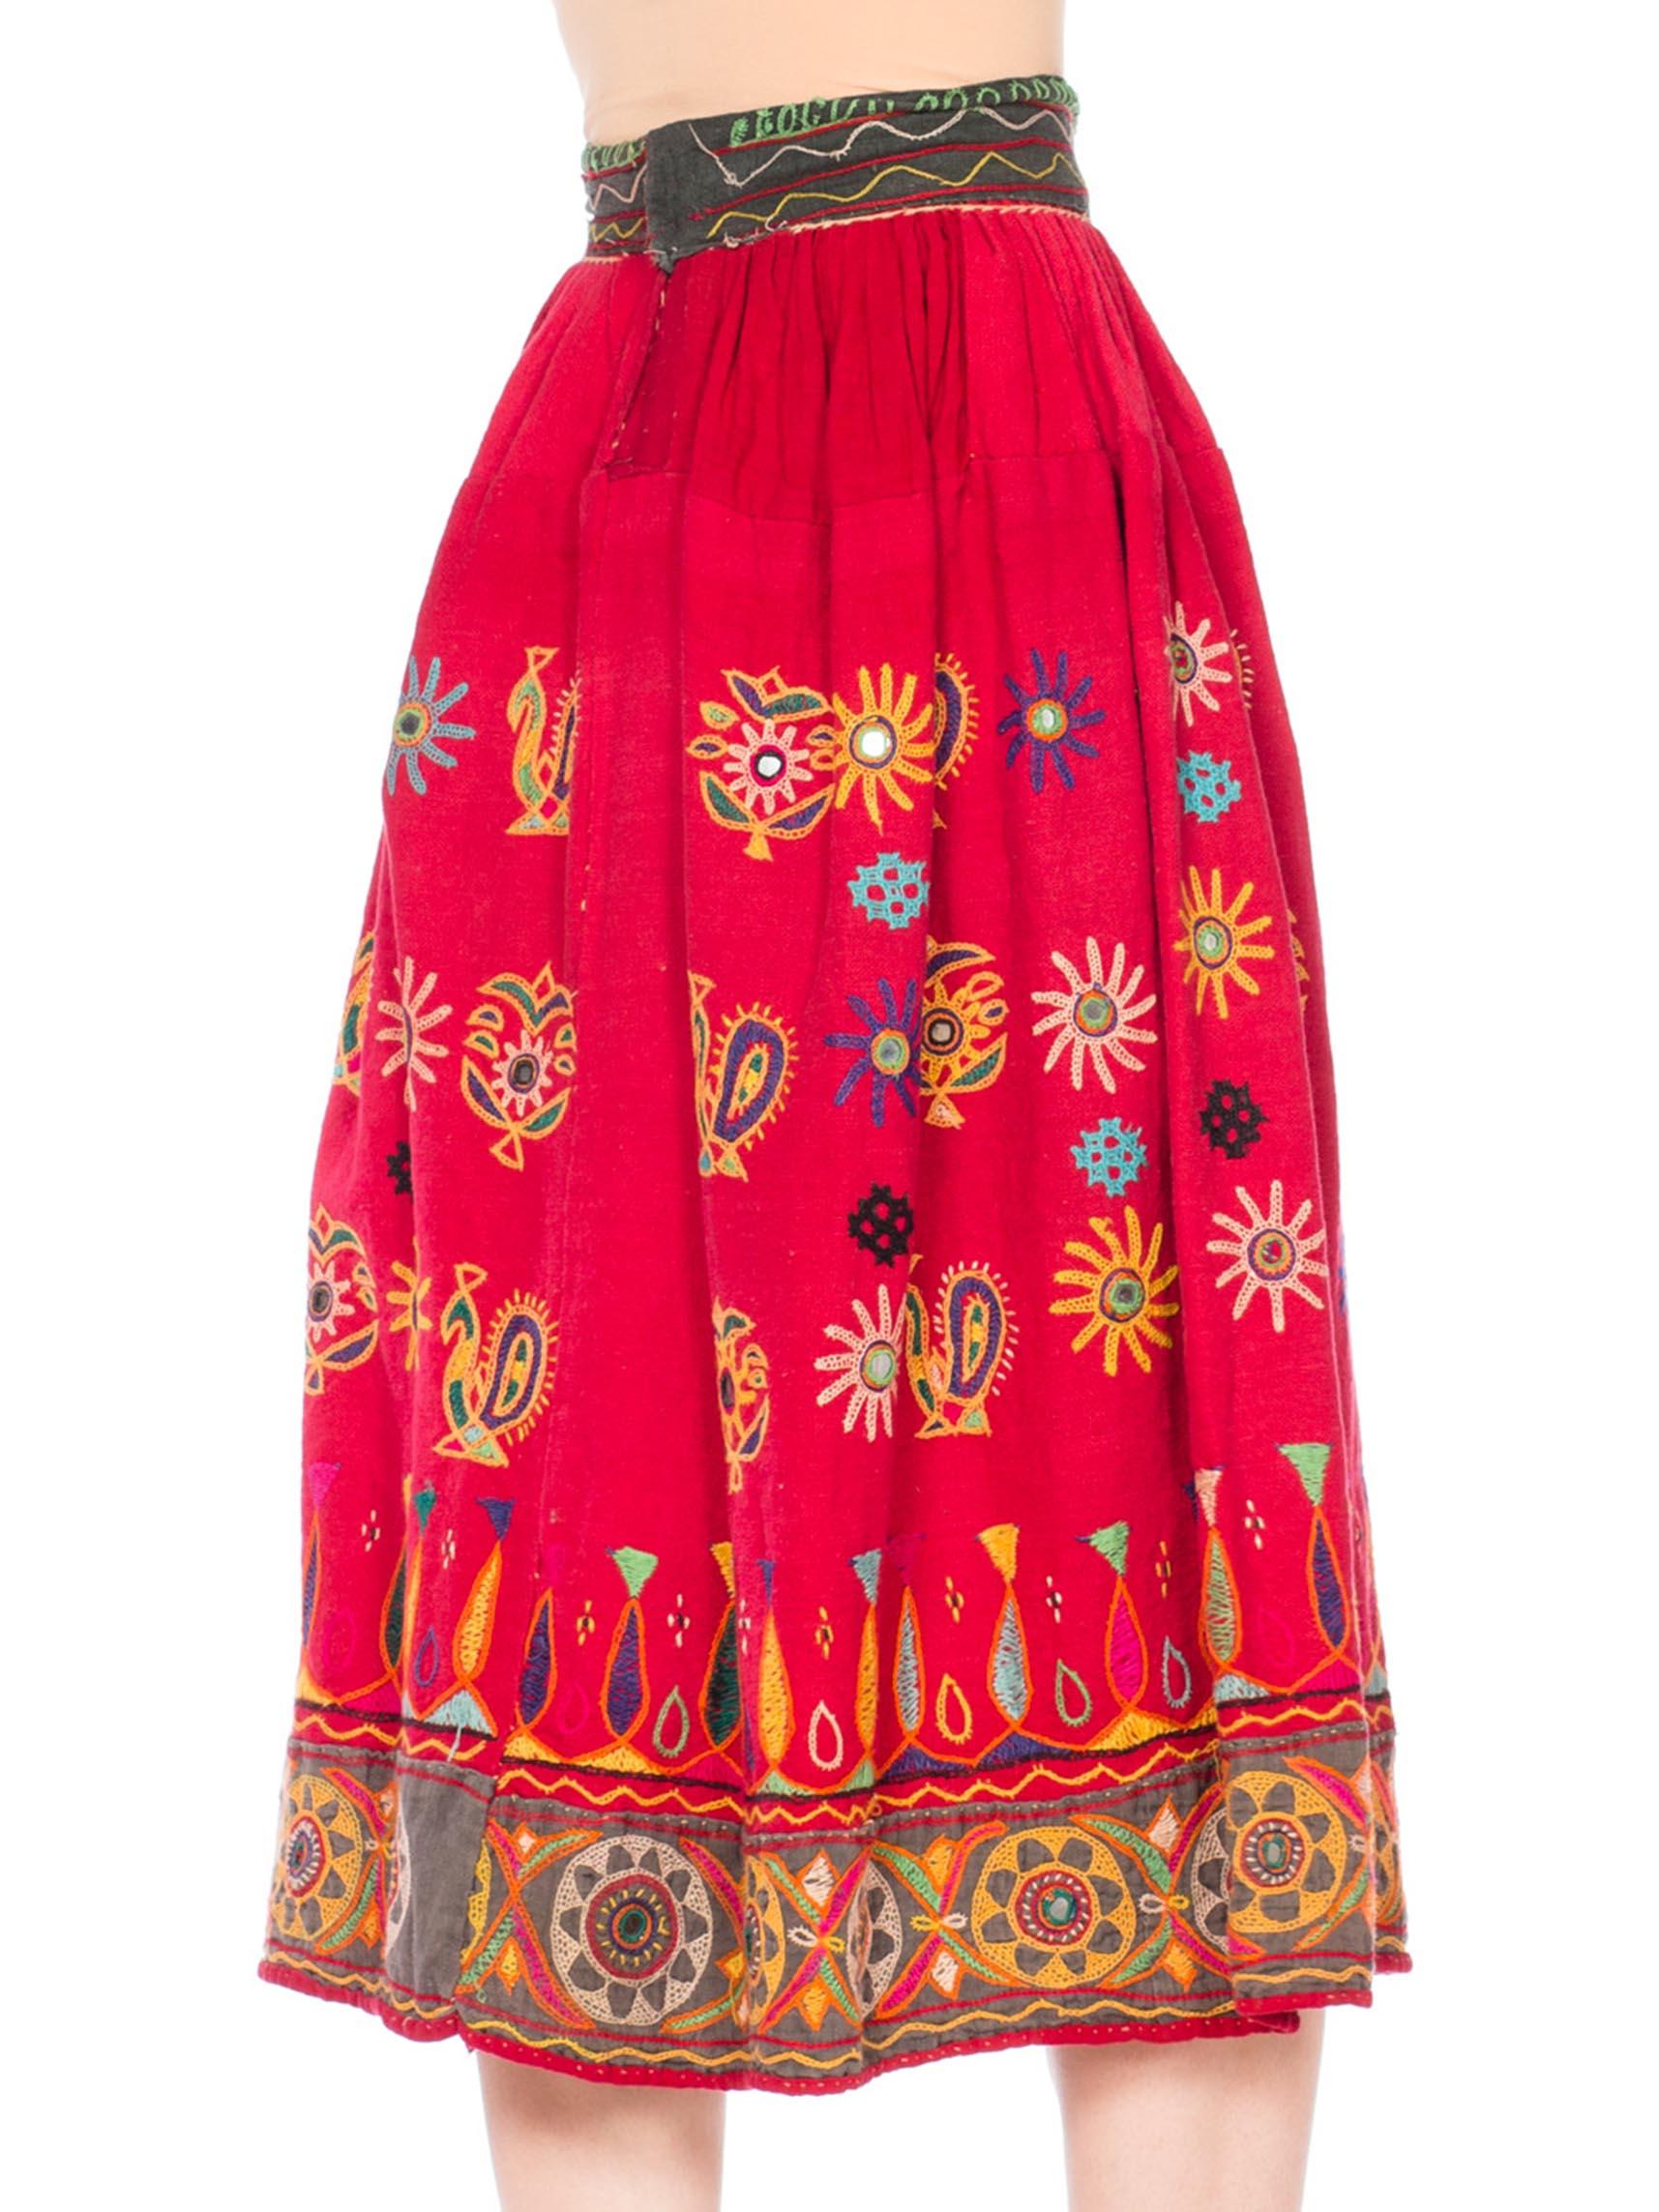 Women's 1970S Indian Cotton Hand Embroidered Skirt With Glass Mirrors